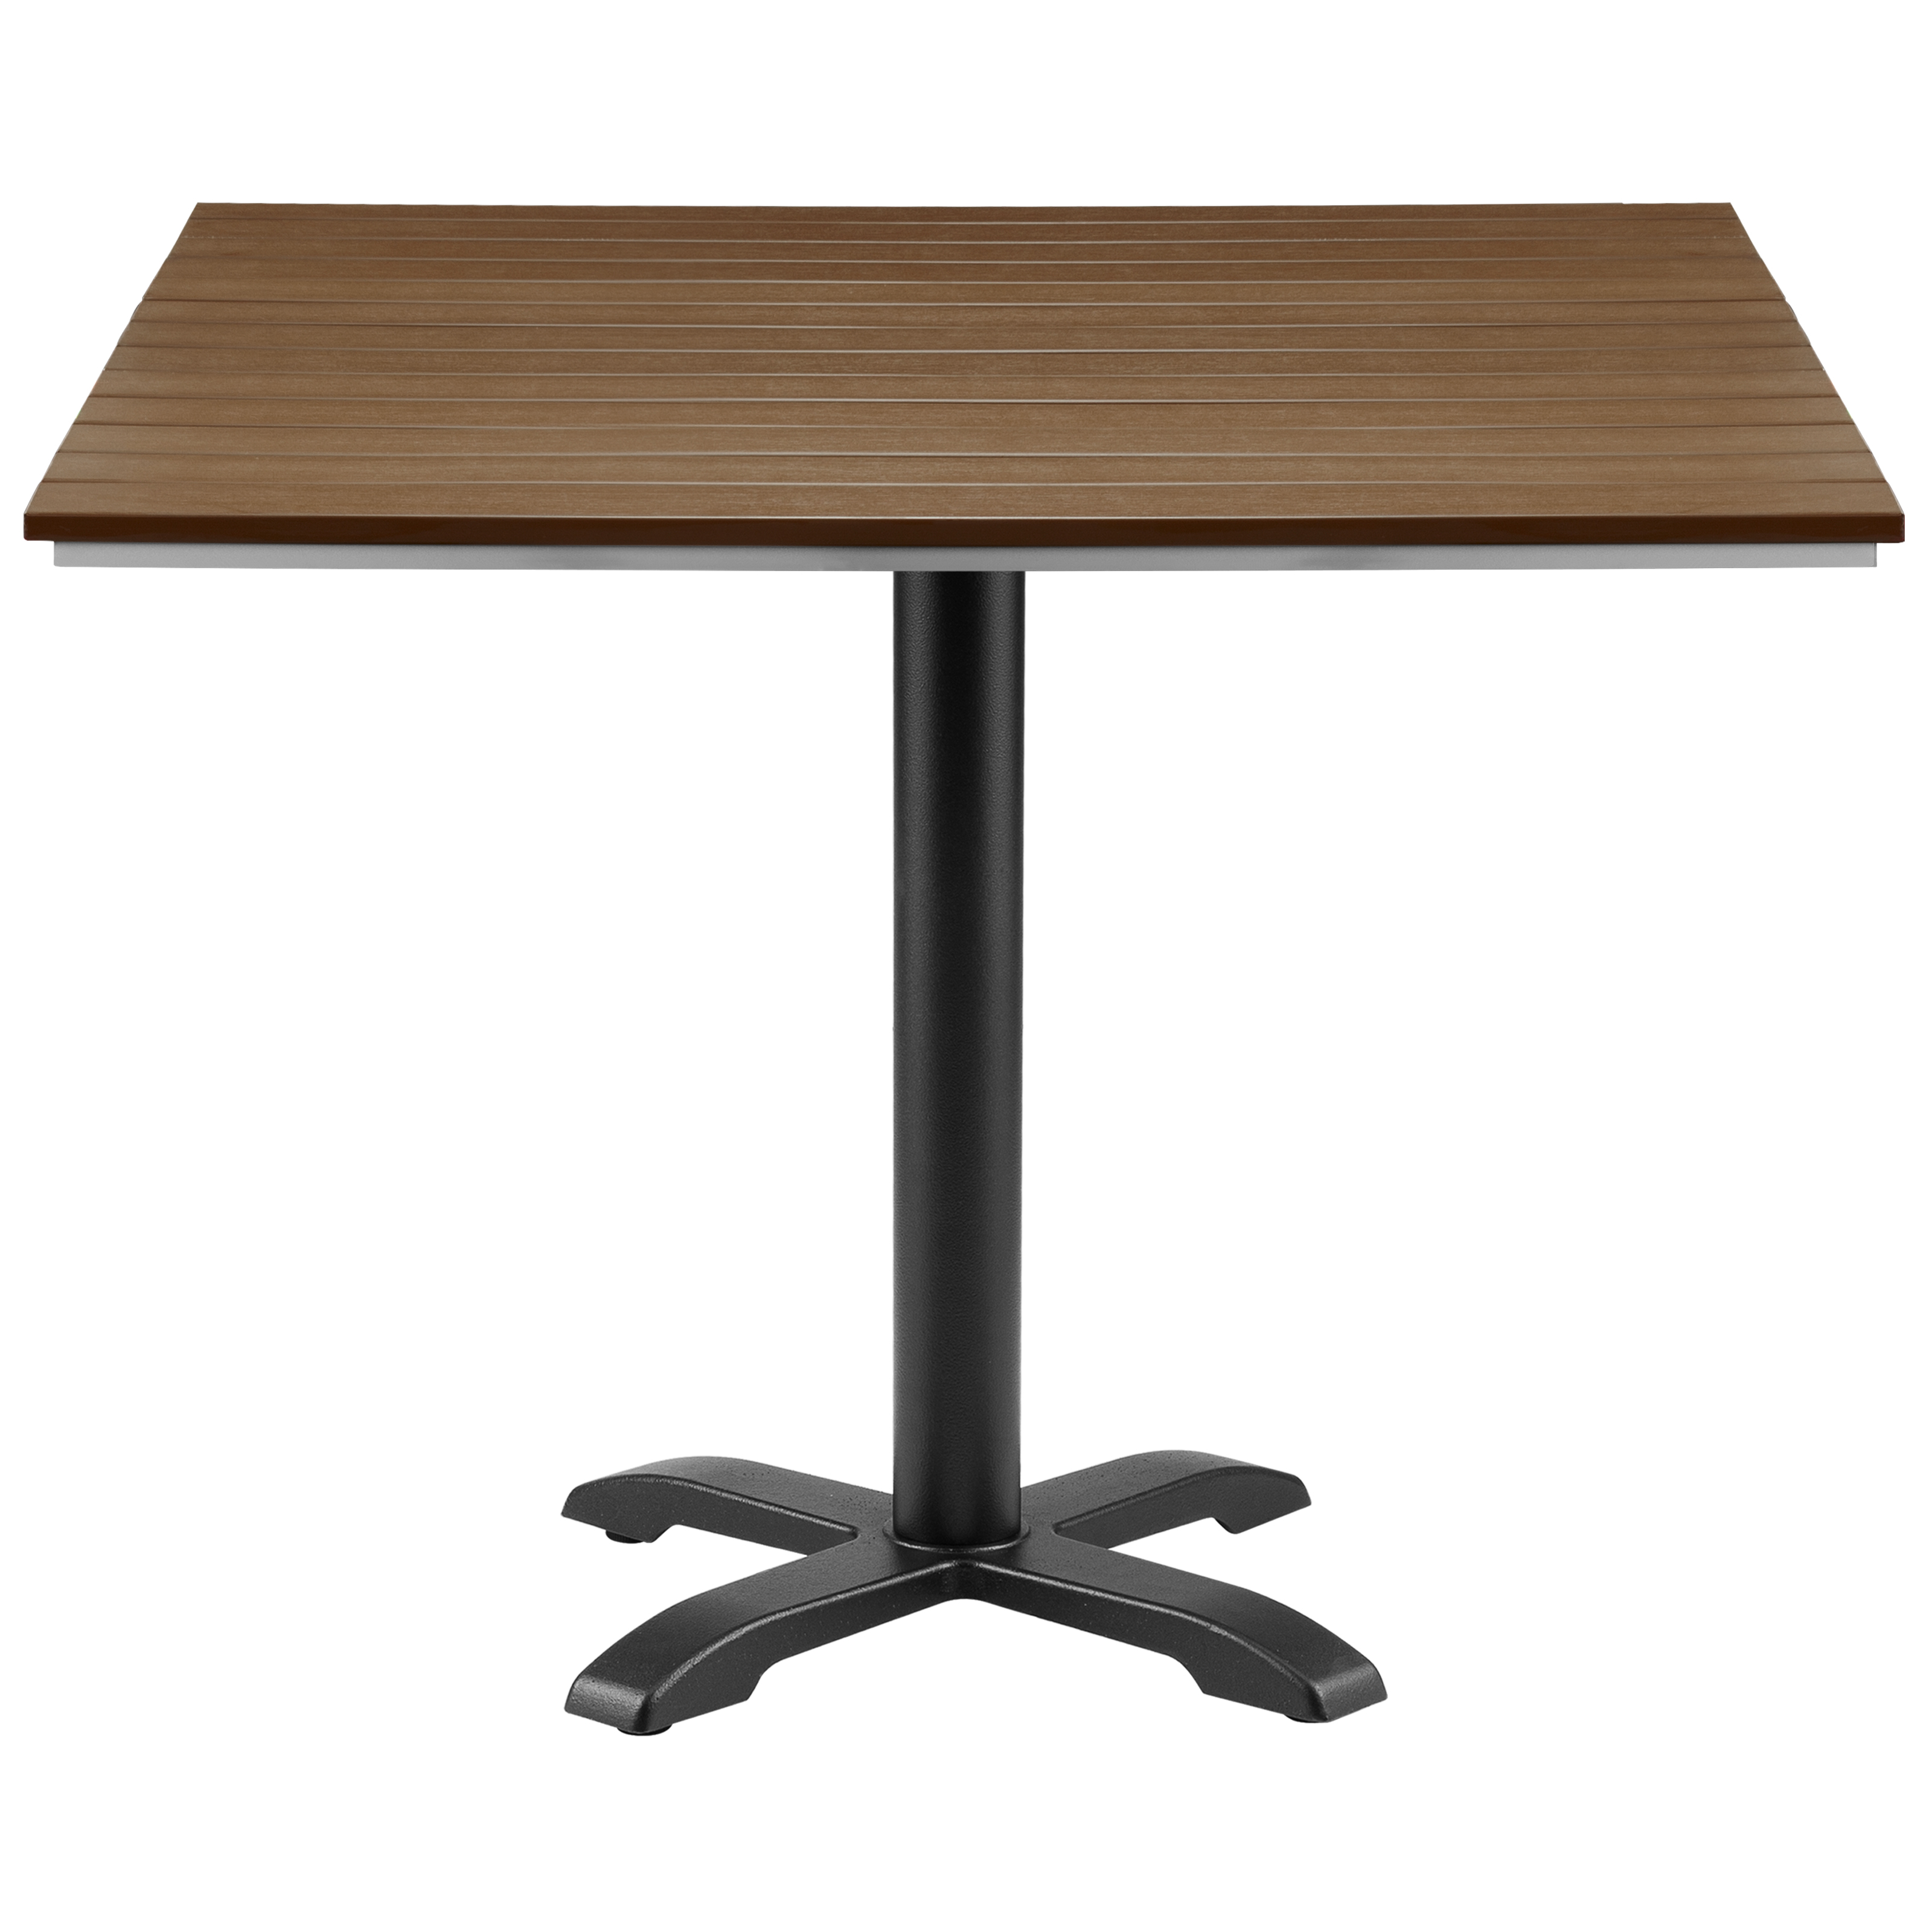 MAUI TABLE TOPS
$229.00 – $619.00
CLICK FOR SPEC SHEET
